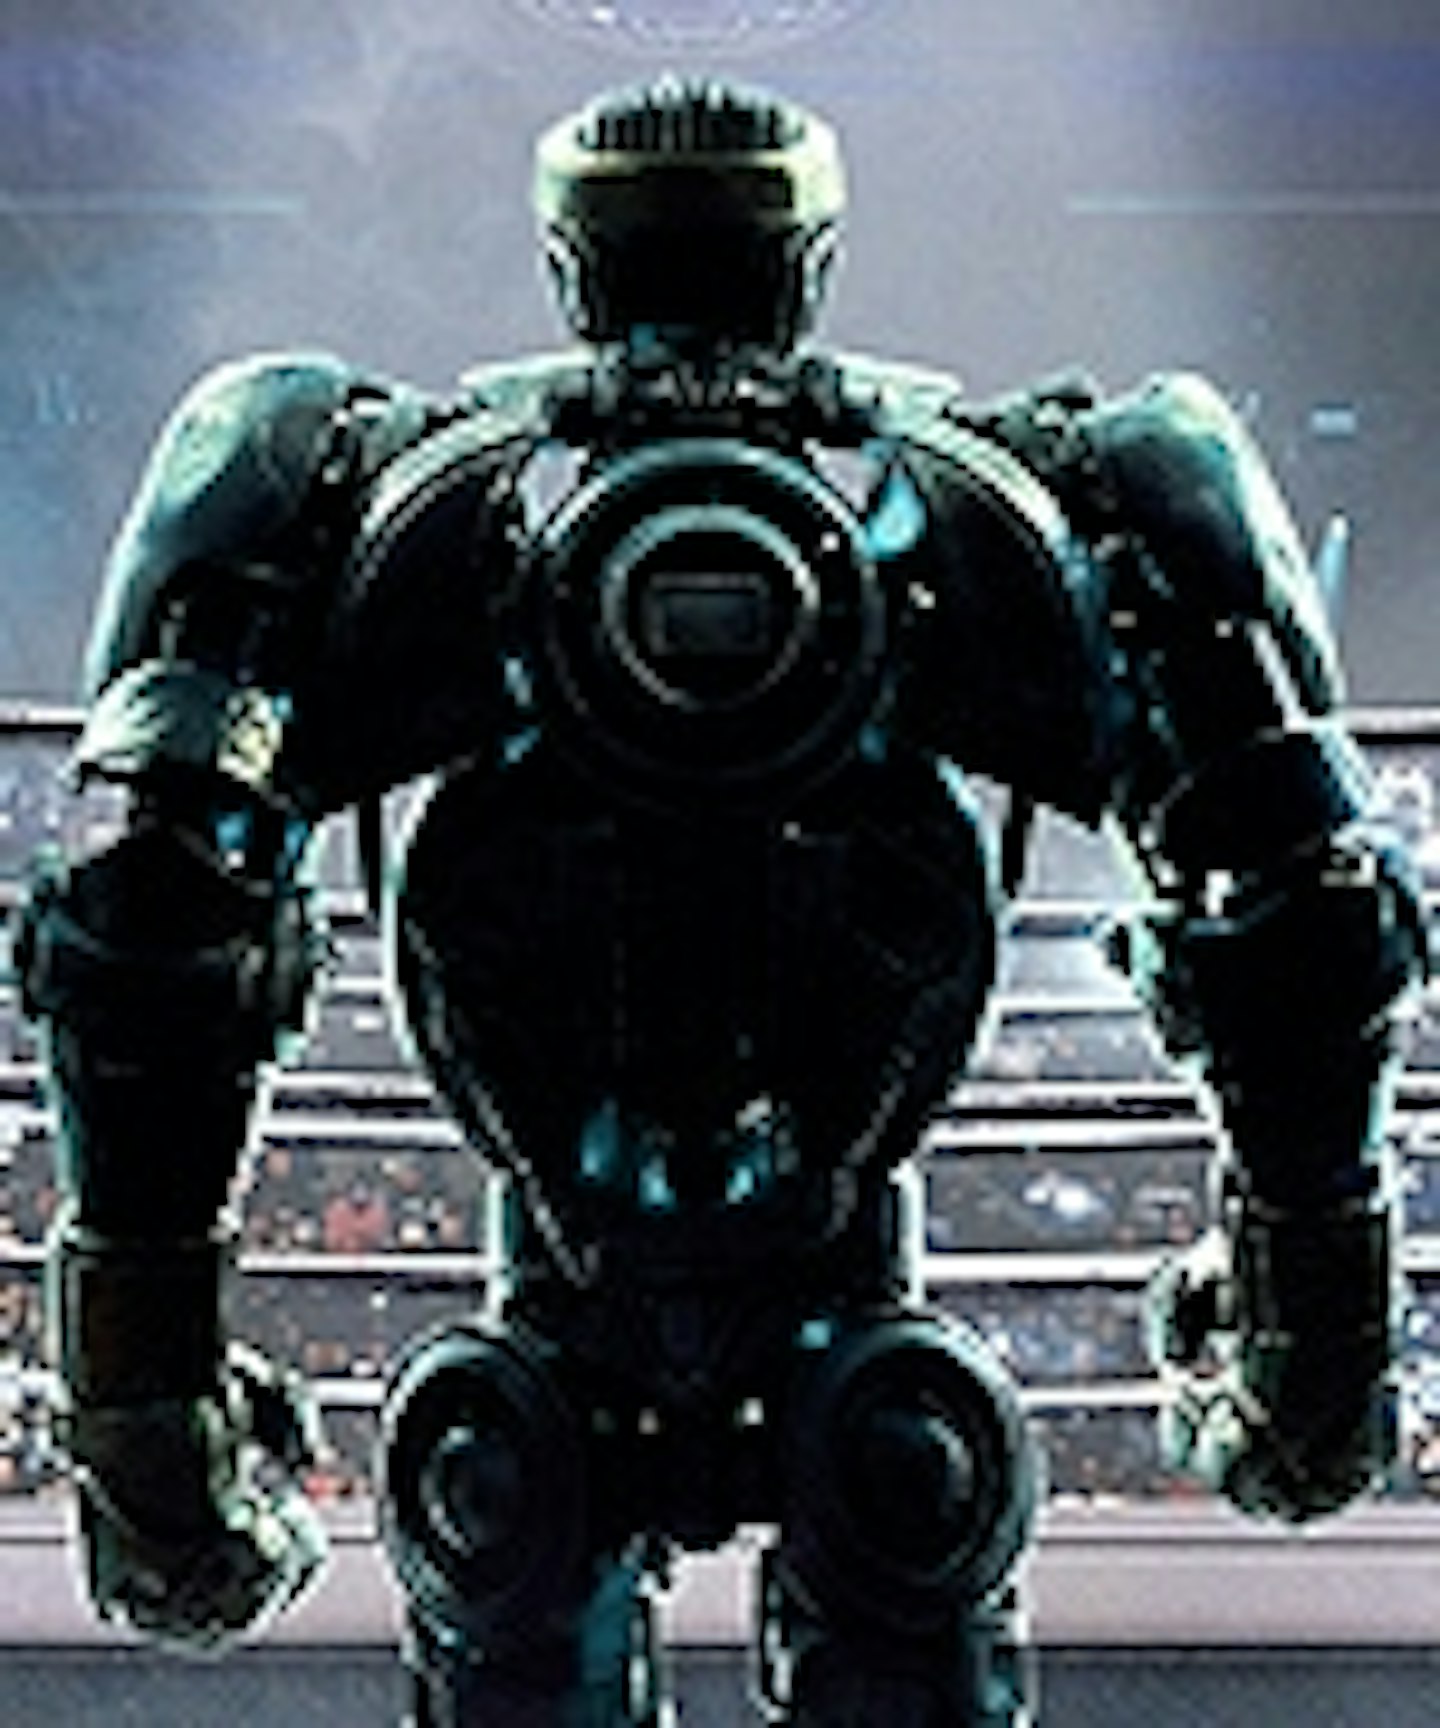 New Japanese Real Steel Trailer Drops